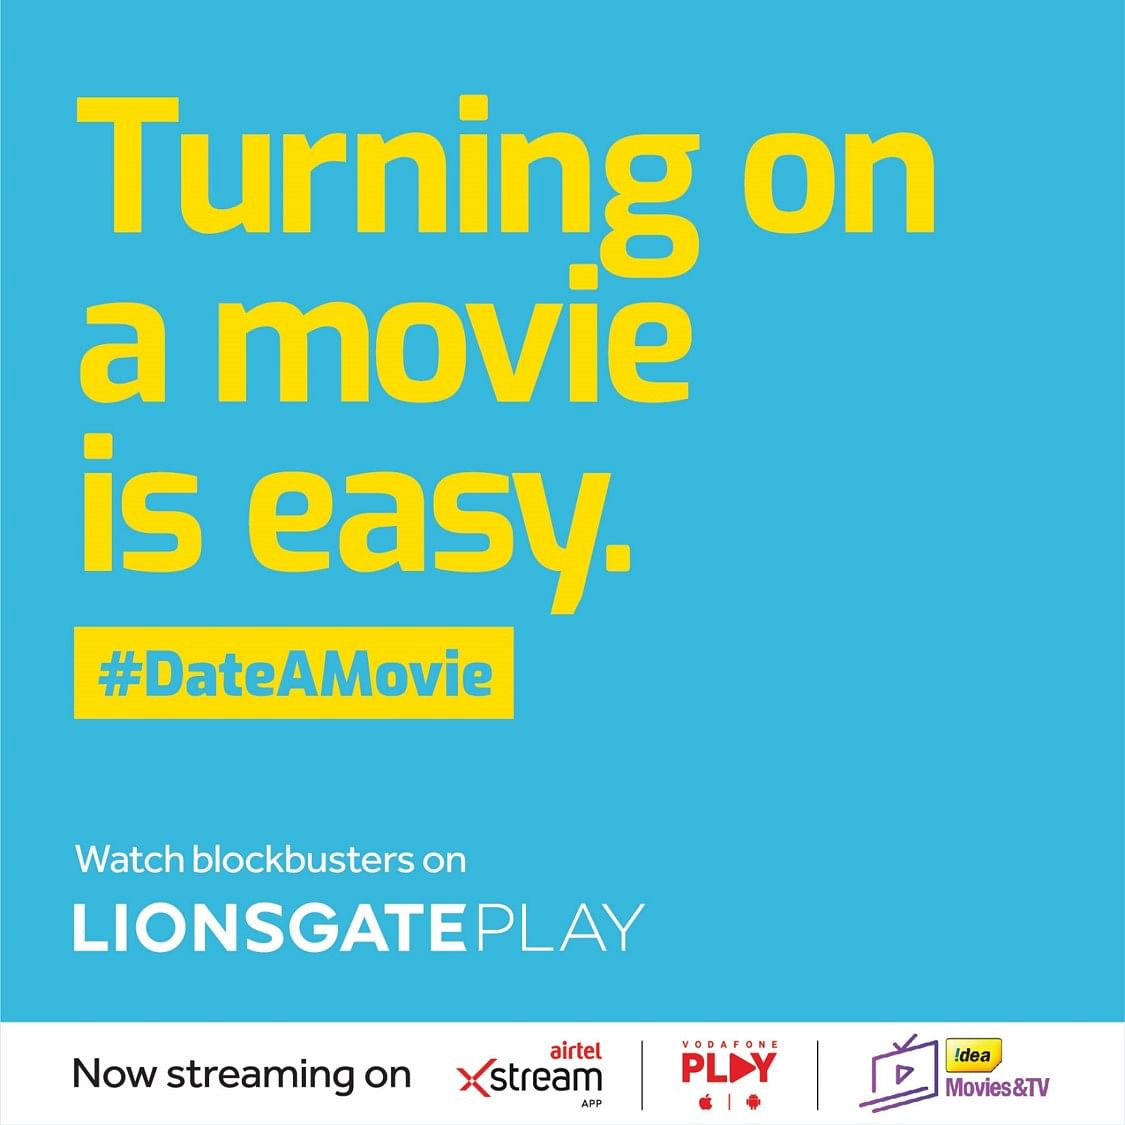 Lionsgate Play launches Valentine’s Day campaign, #DateAMovie